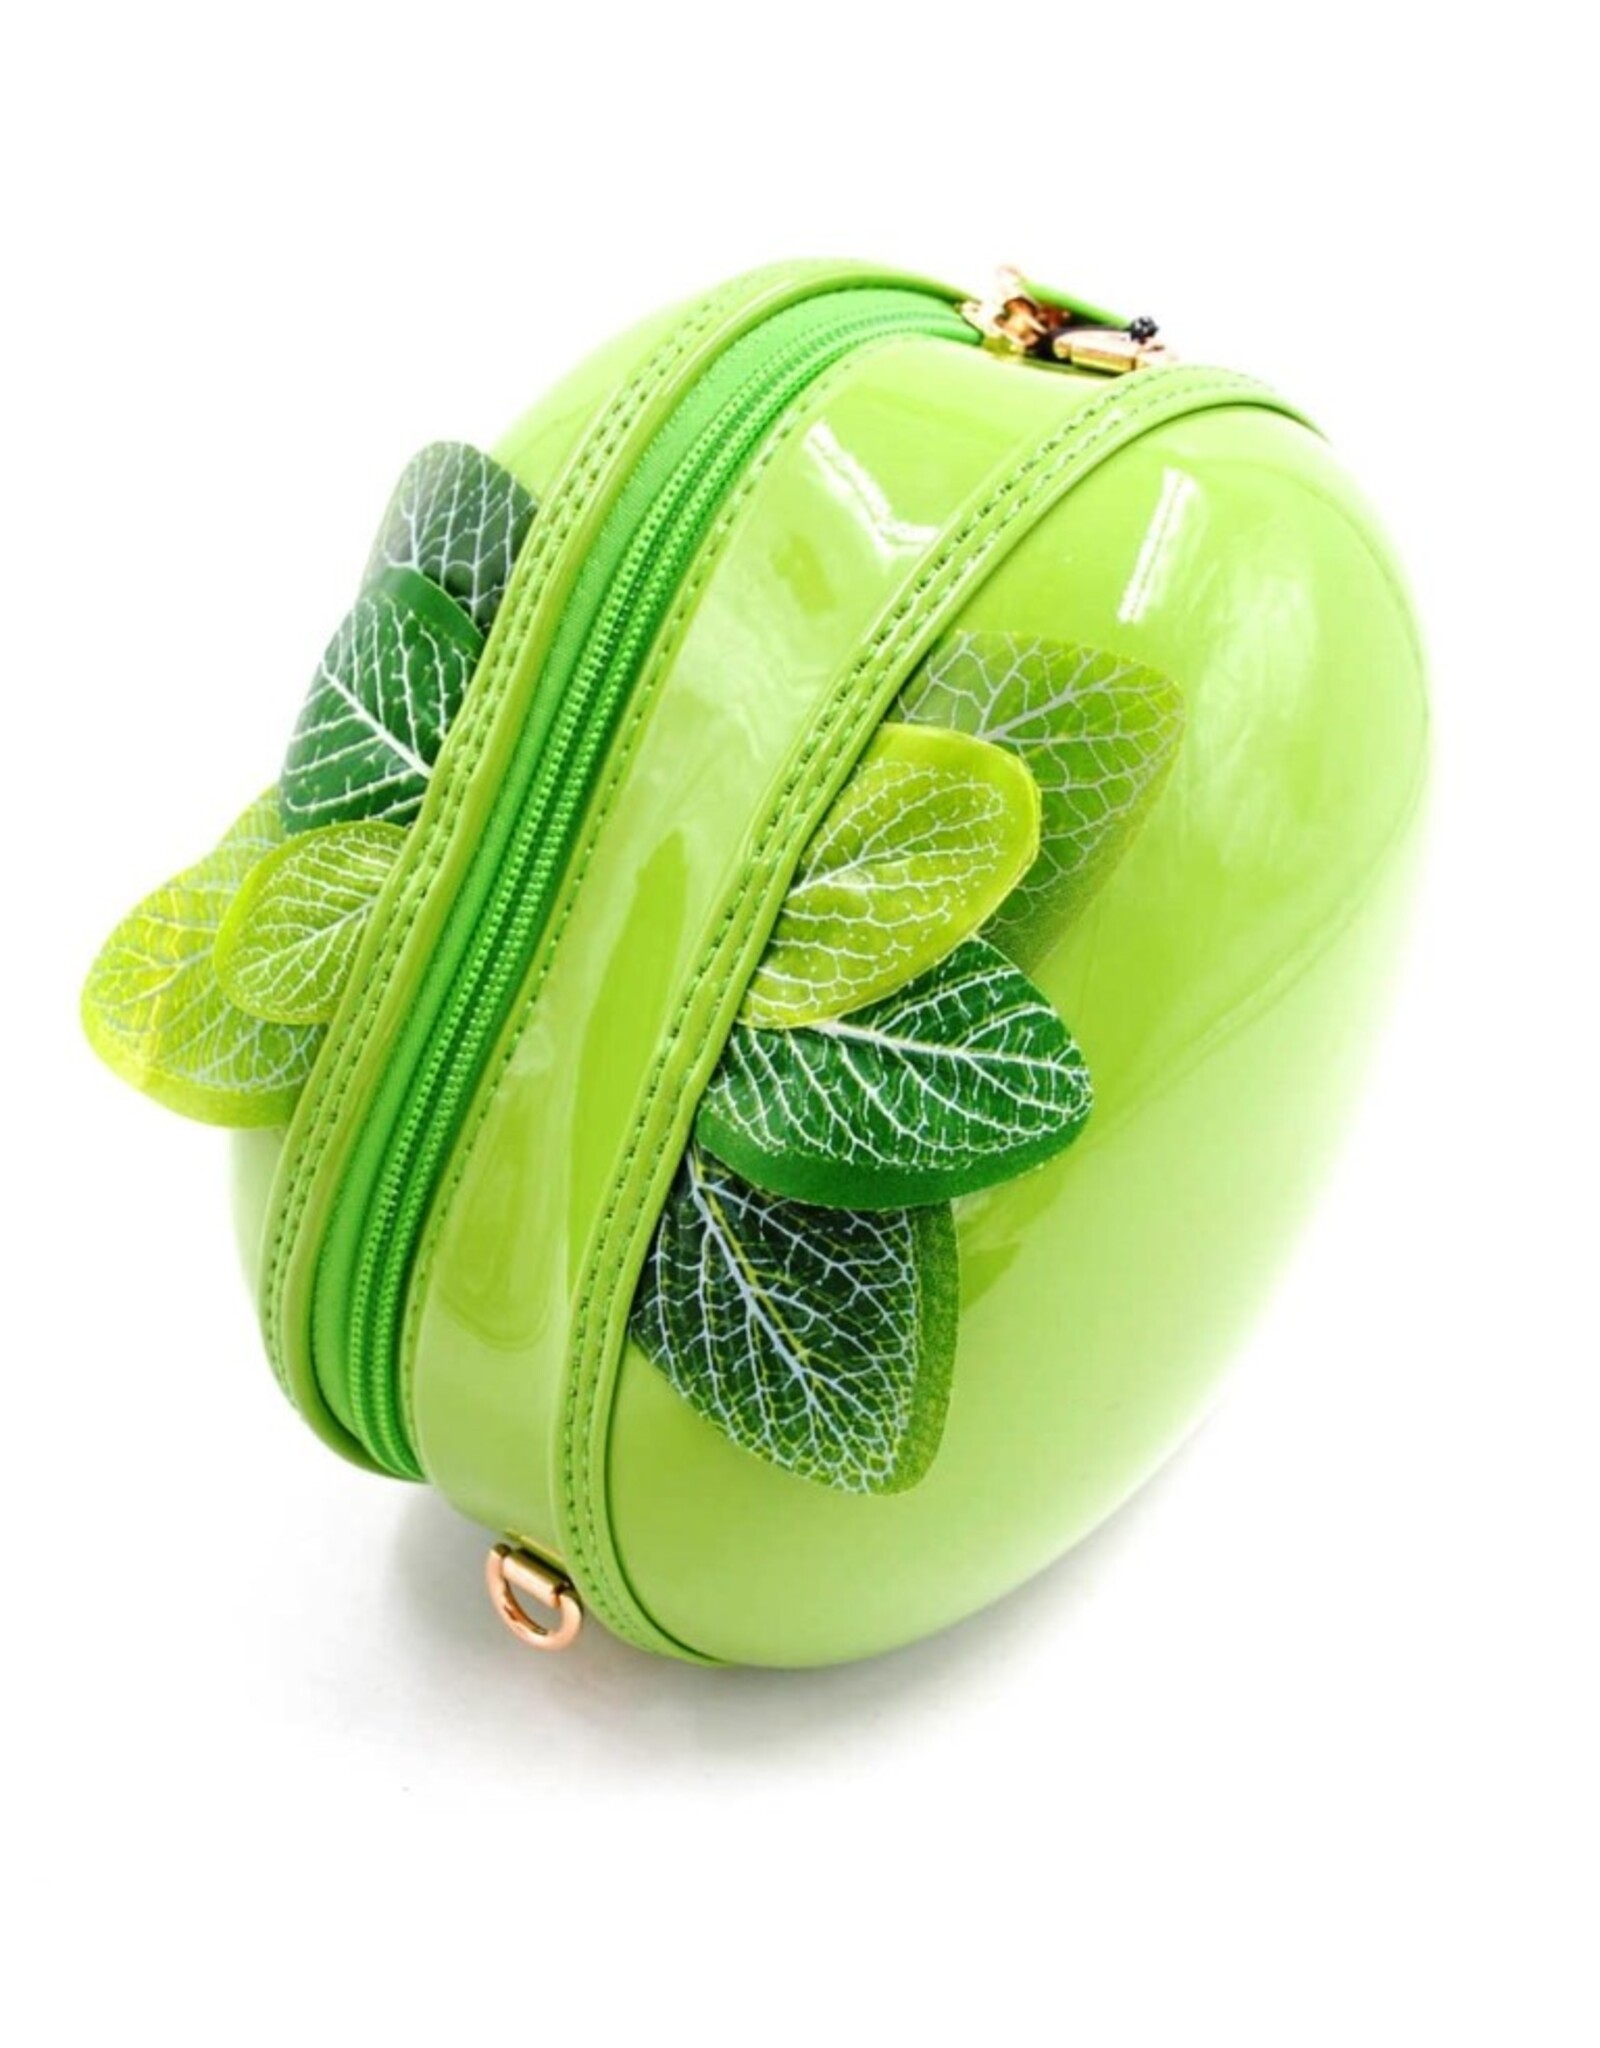 Systyle Fantasy bags - Fantasy bag Green berry